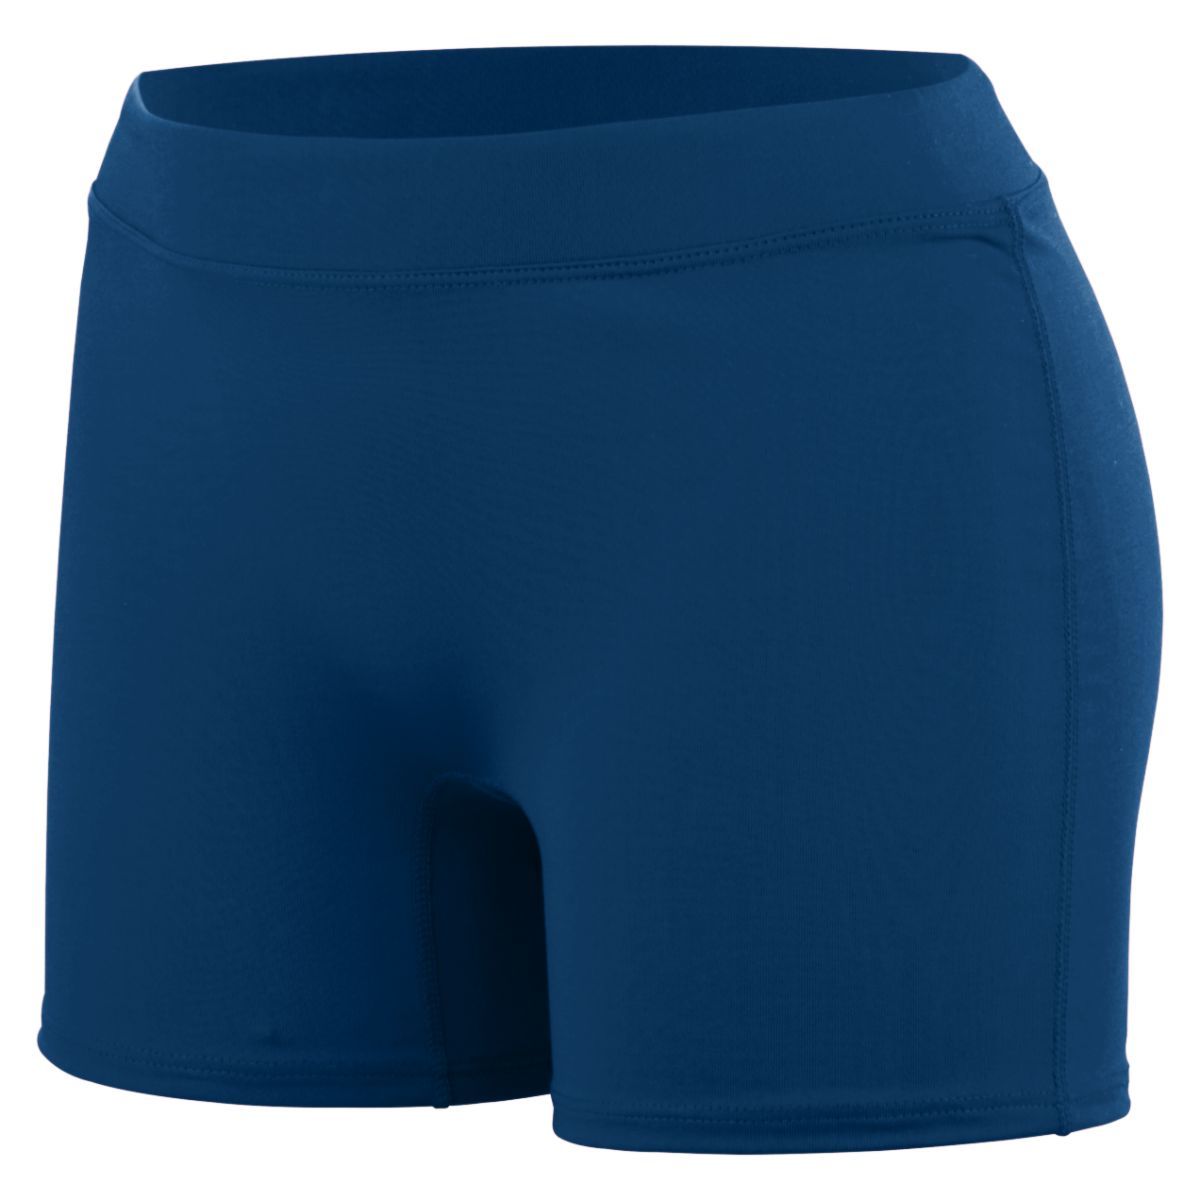 Augusta Sportswear Ladies Enthuse Shorts in Navy  -Part of the Ladies, Ladies-Shorts, Augusta-Products, Volleyball product lines at KanaleyCreations.com